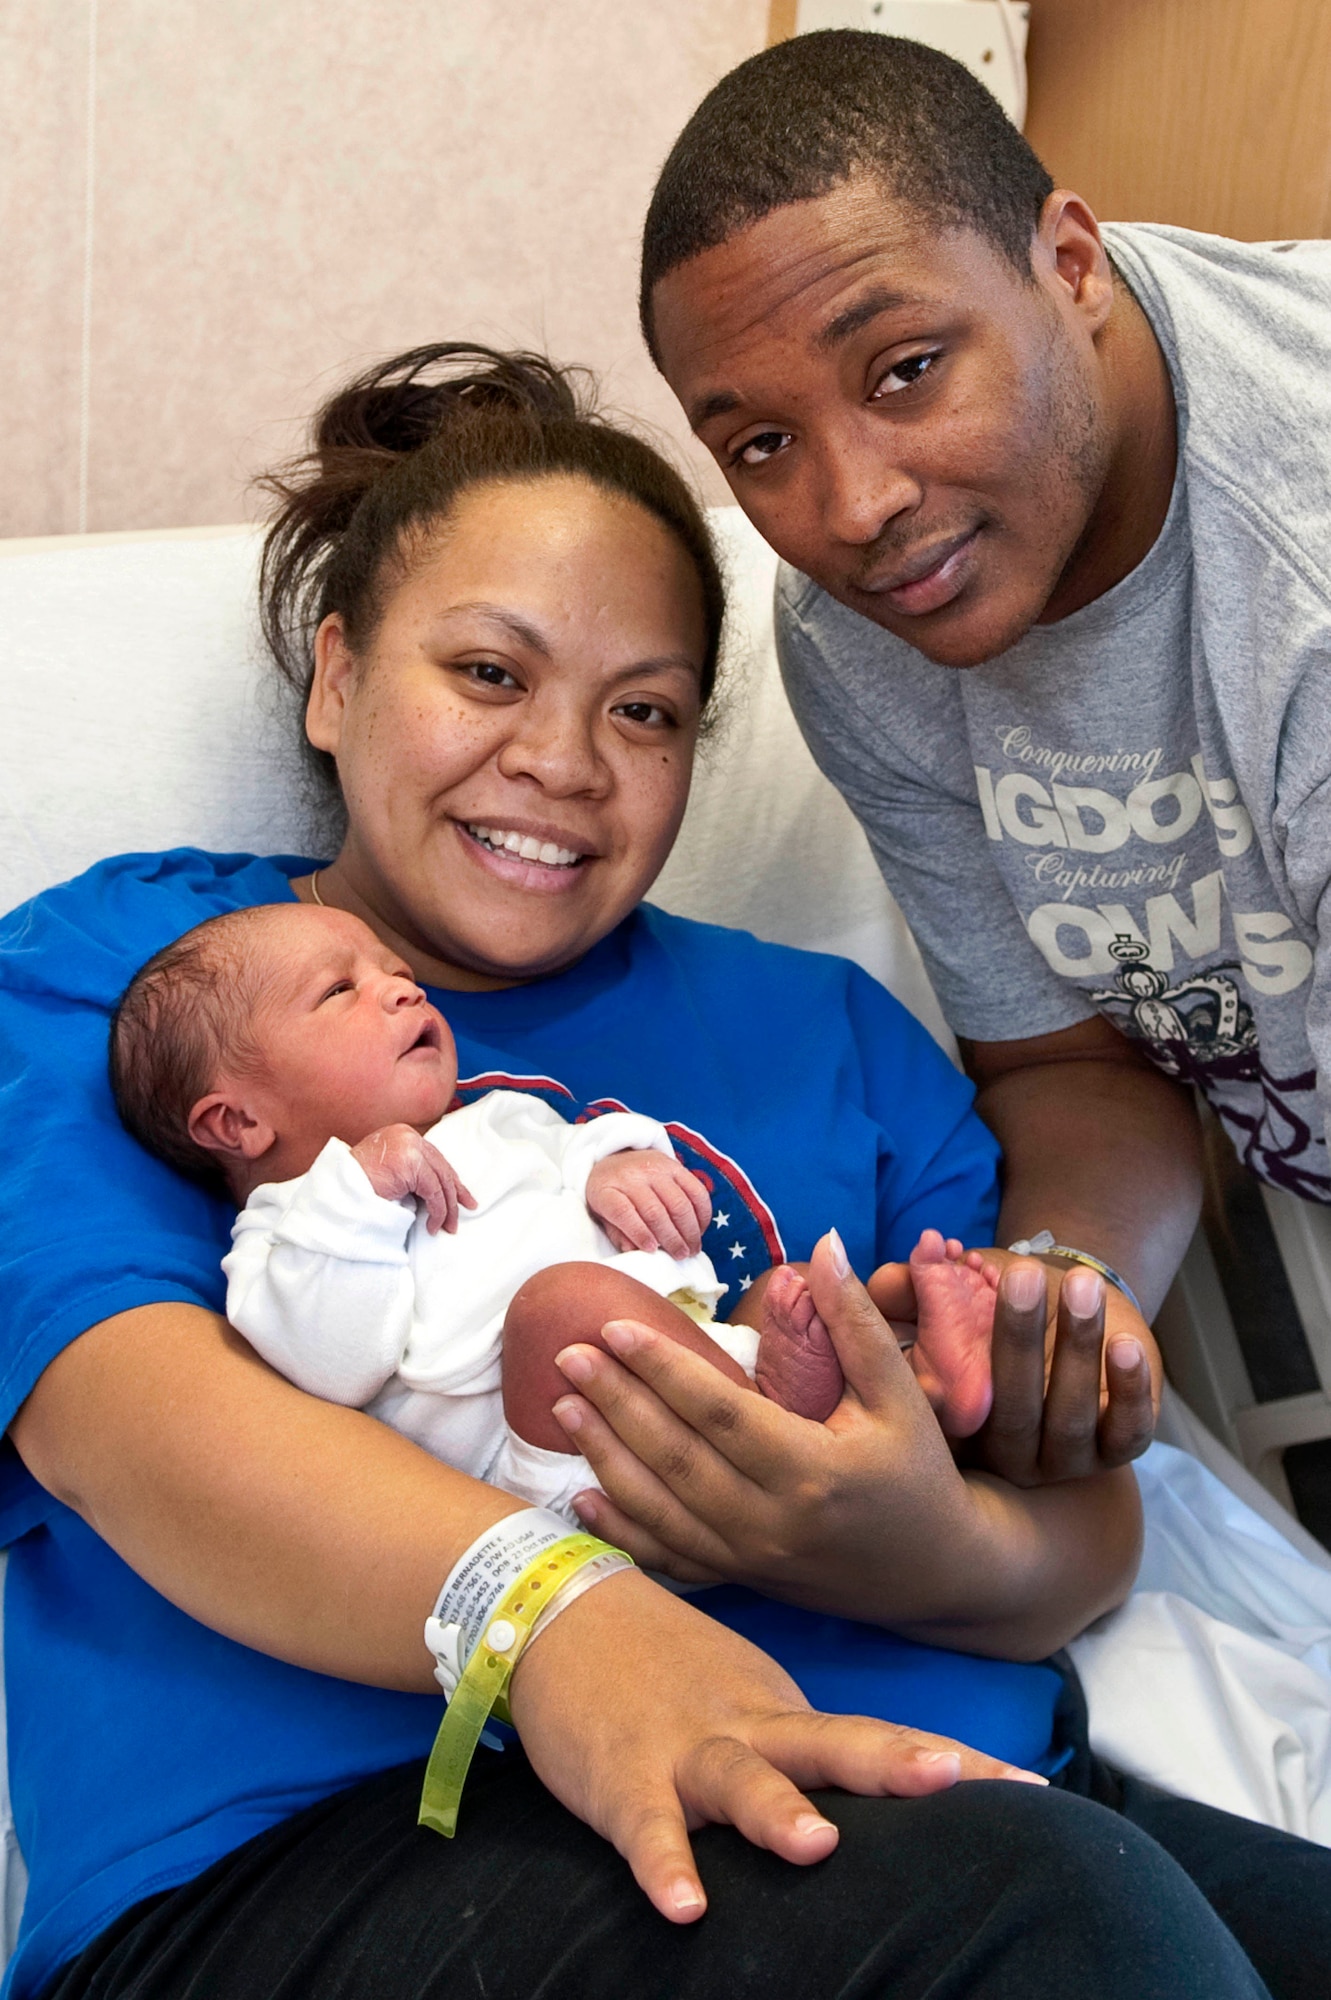 NELLIS AIR FORCE BASE, Nev.-Tech. Sgt. TJ Merritt, 57th Aircraft Maintenance Squadron weapons expeditor, and his wife, Bernadette, pose for a photo with their newborn son, Kamali'i, Jan. 4 at the Mike O'Callaghan Federal Hospital. Born Jan. 3 at 5:58 a.m., Kamali'i was the first child born at Nellis in 2011. (U.S. Air Force photo by Airman 1st Class George Goslin)
